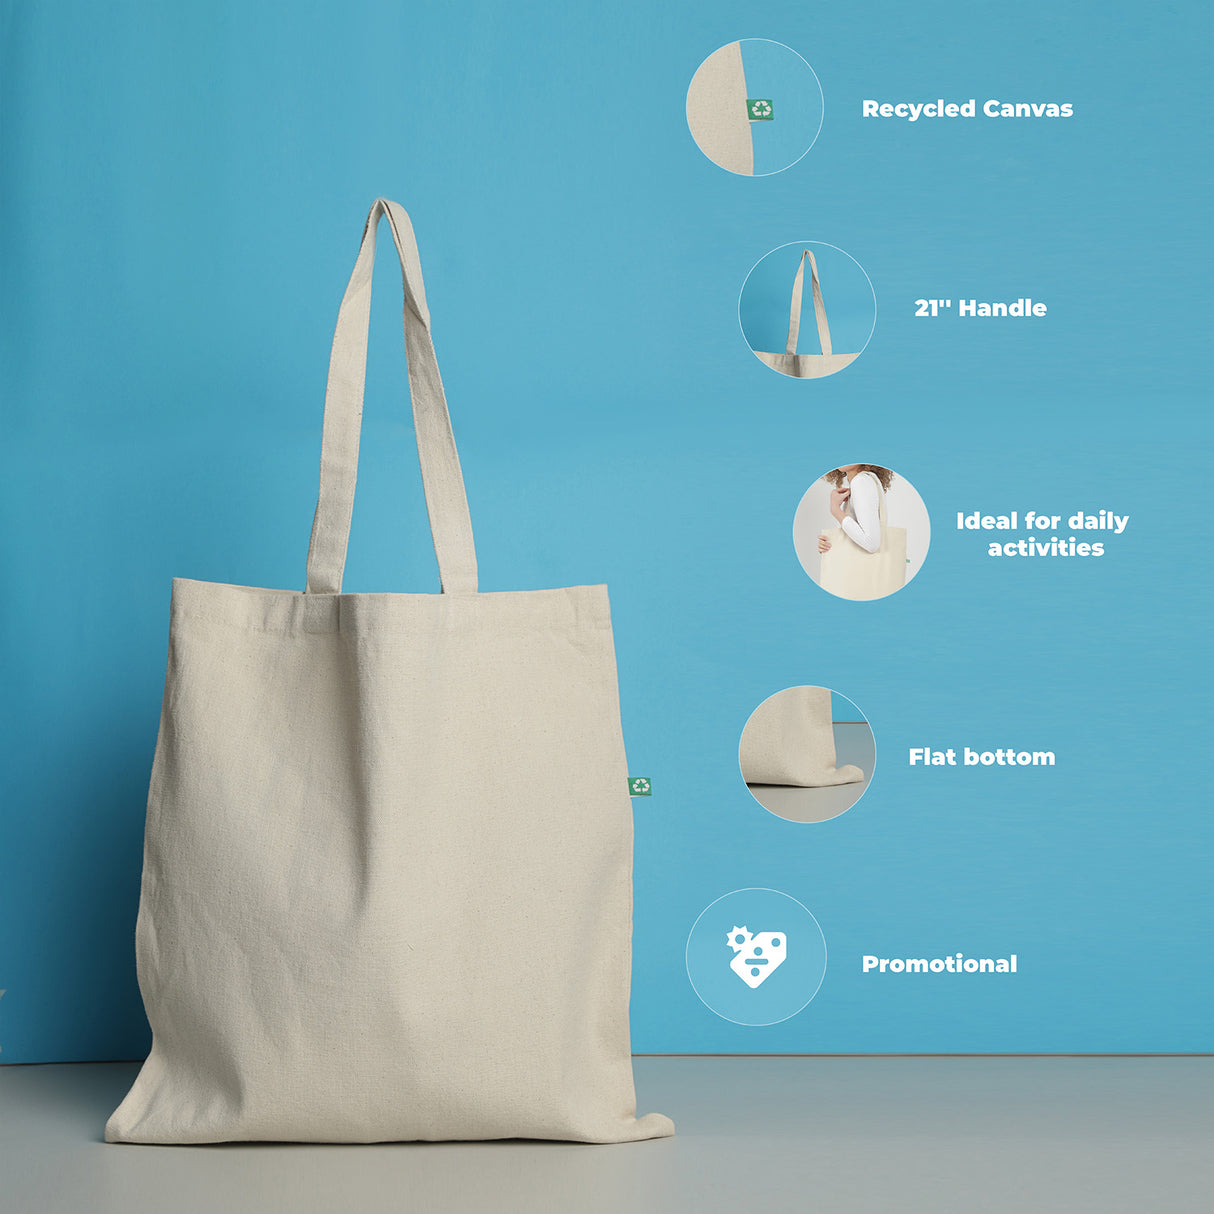 TBF Recycled Cotton Canvas Tote Bags - SR200